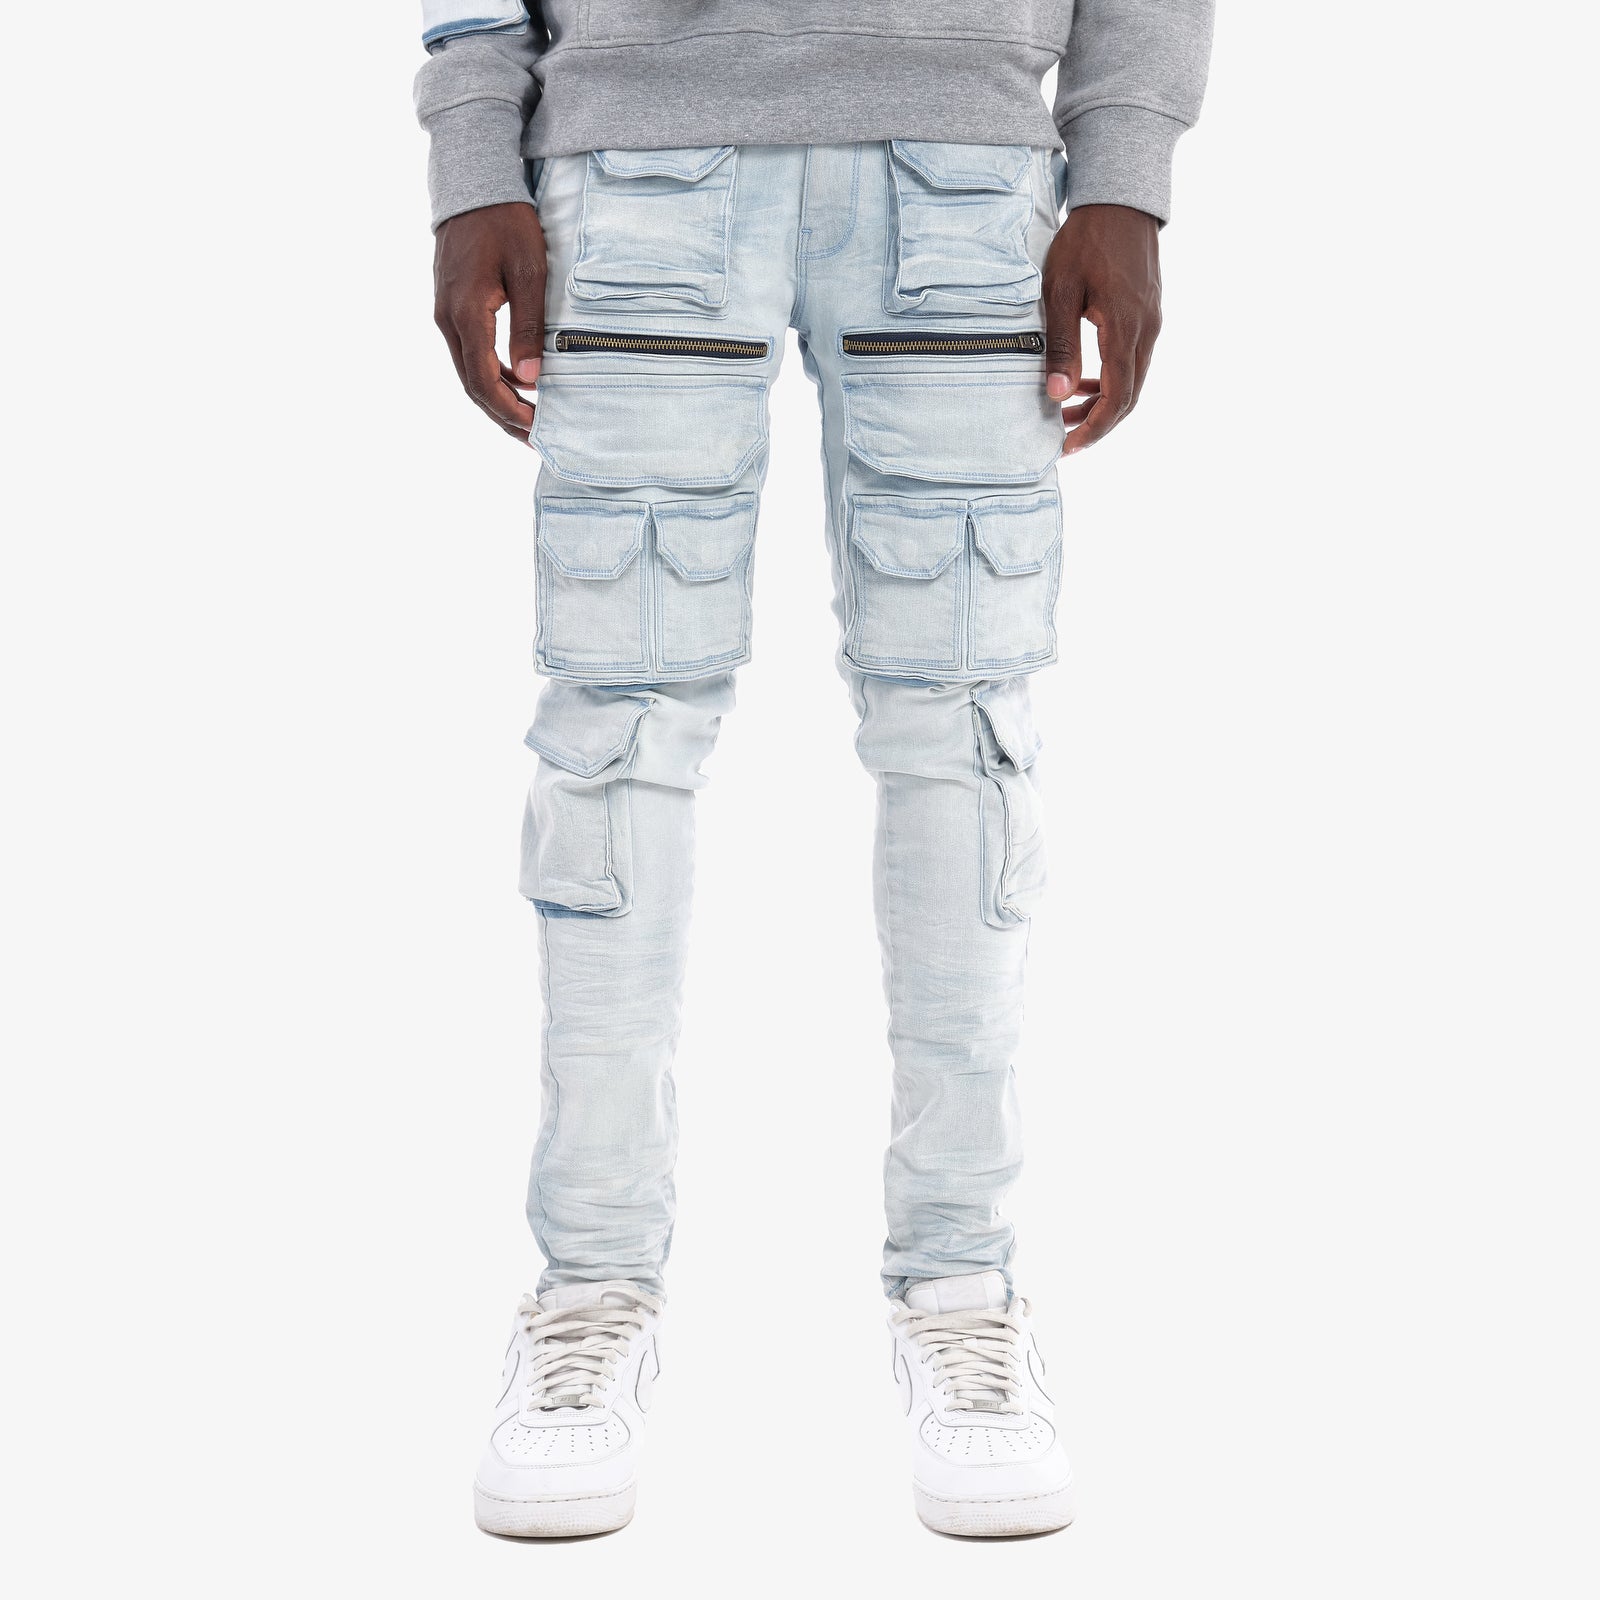 CSY Light blue cargo jeans